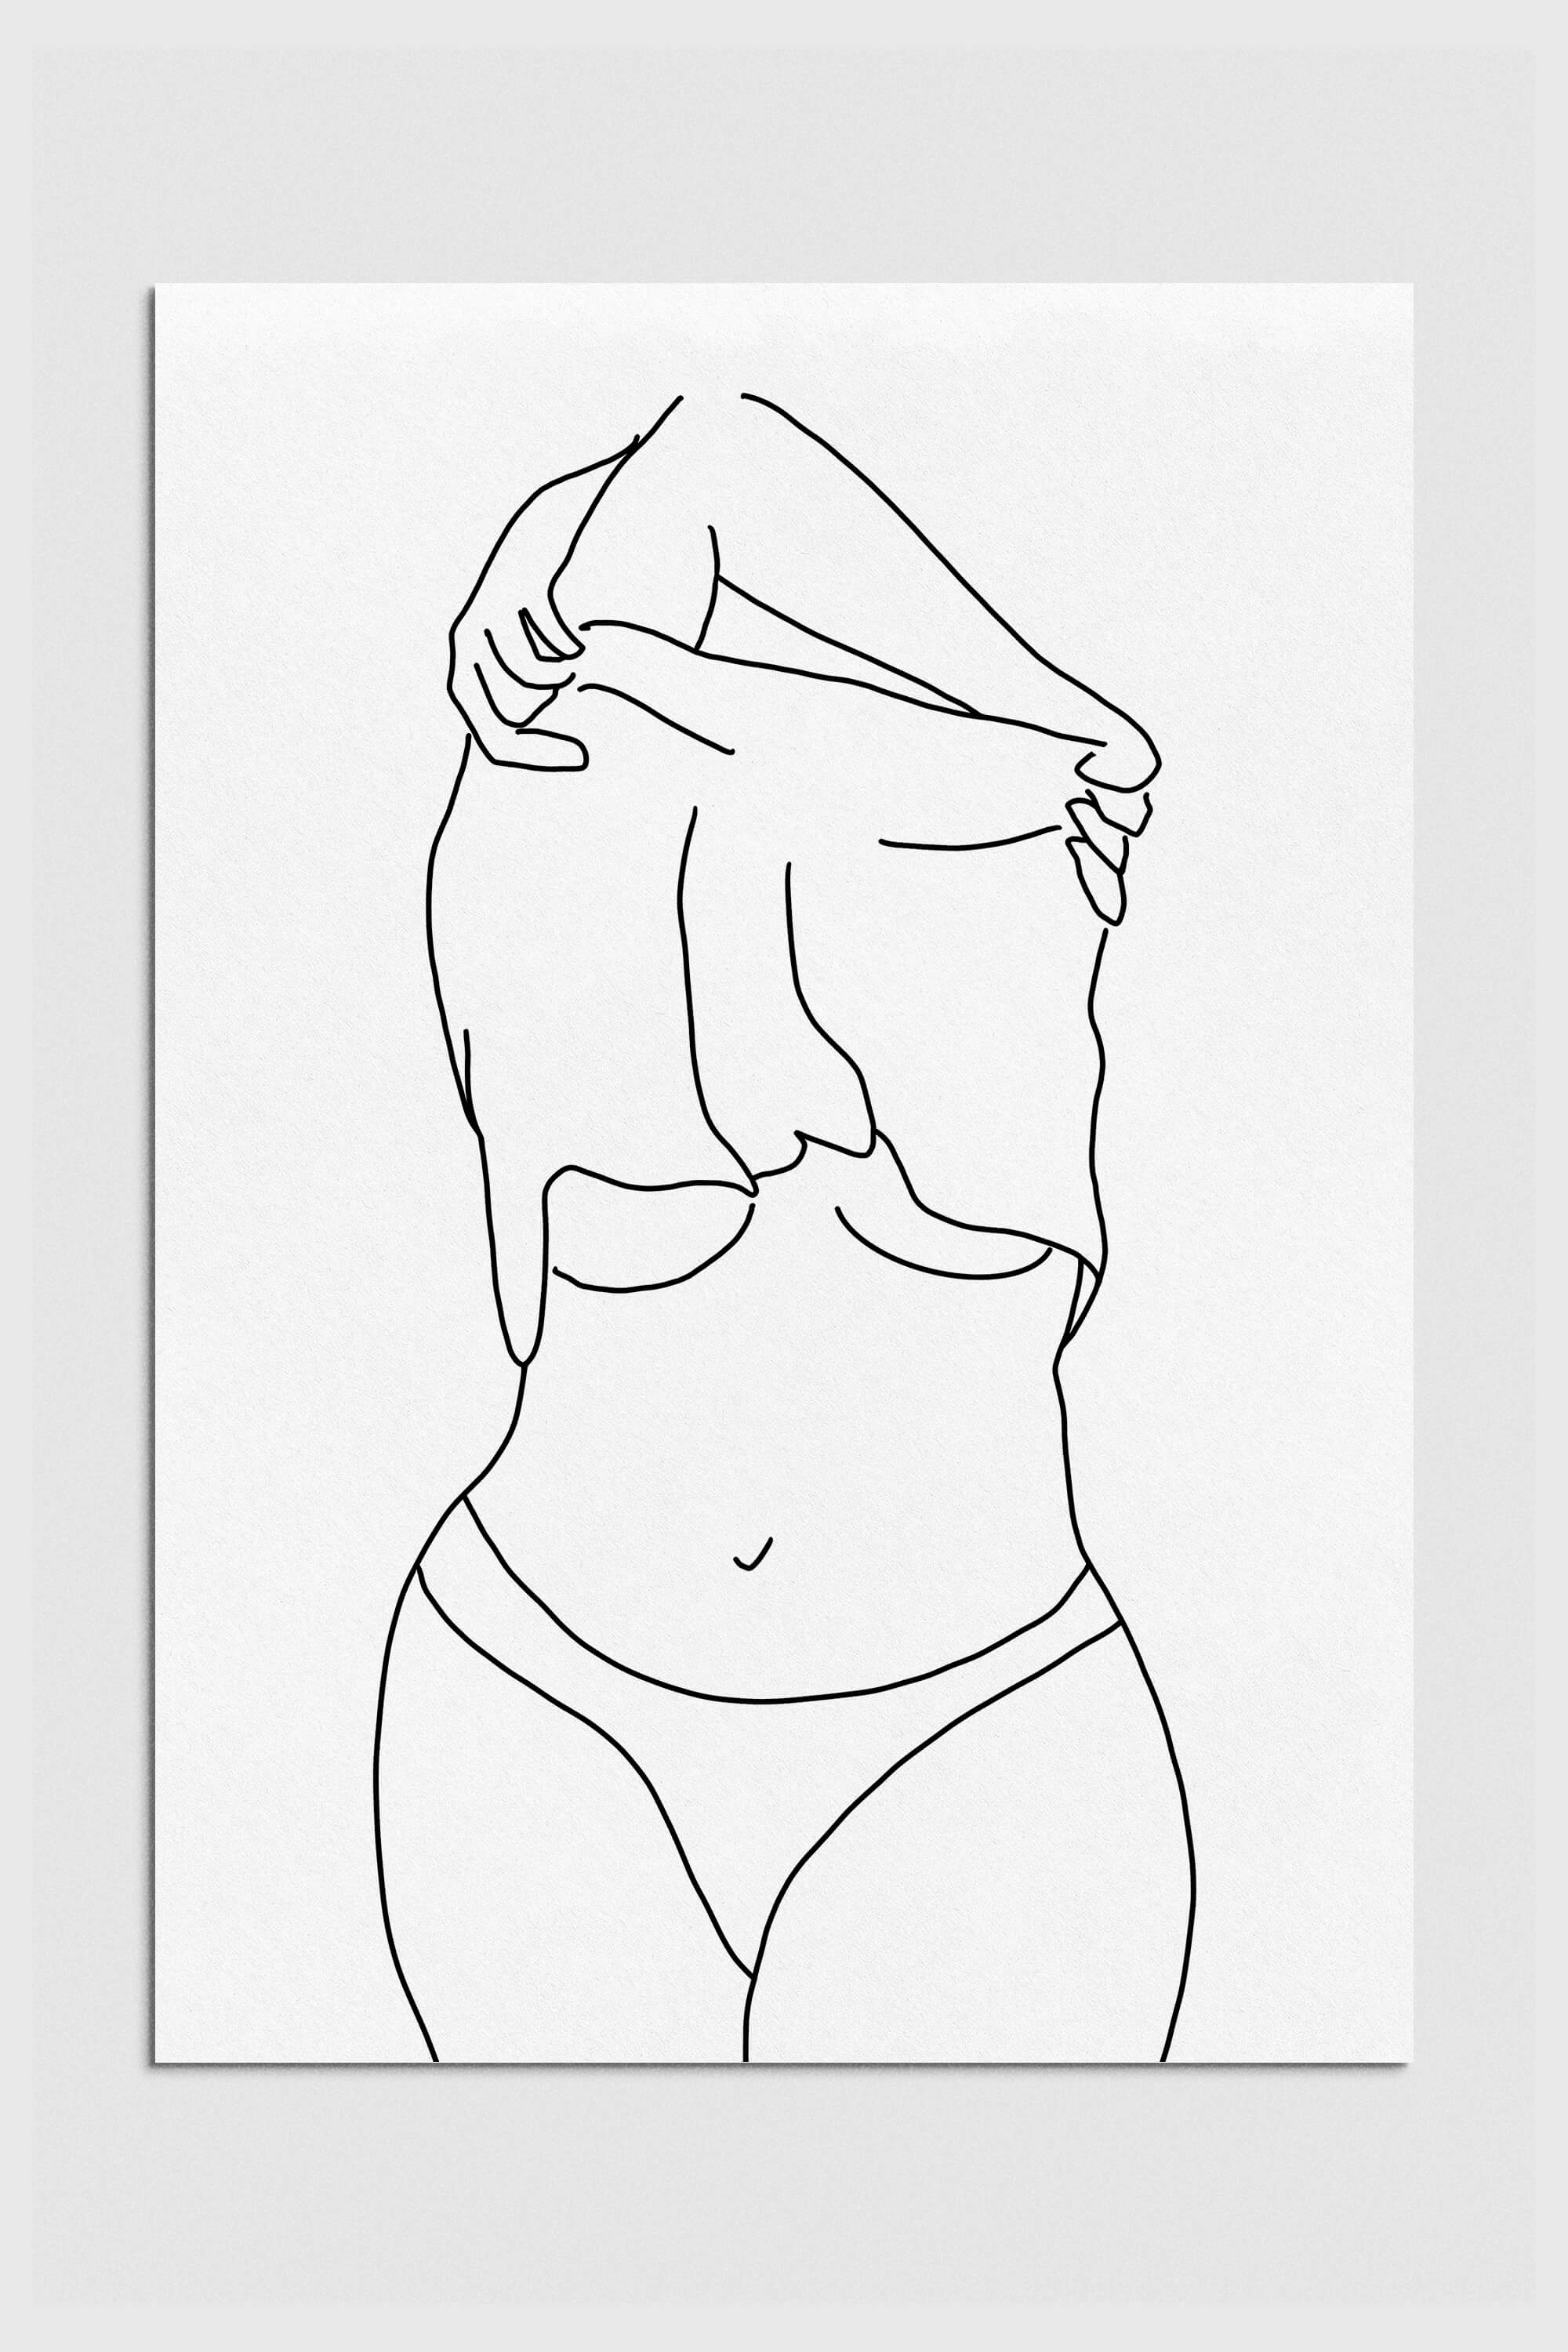 Monochrome line drawing of an empowered woman, celebrating strength and individuality. Feminist wall art with elegant lines conveying a powerful message.